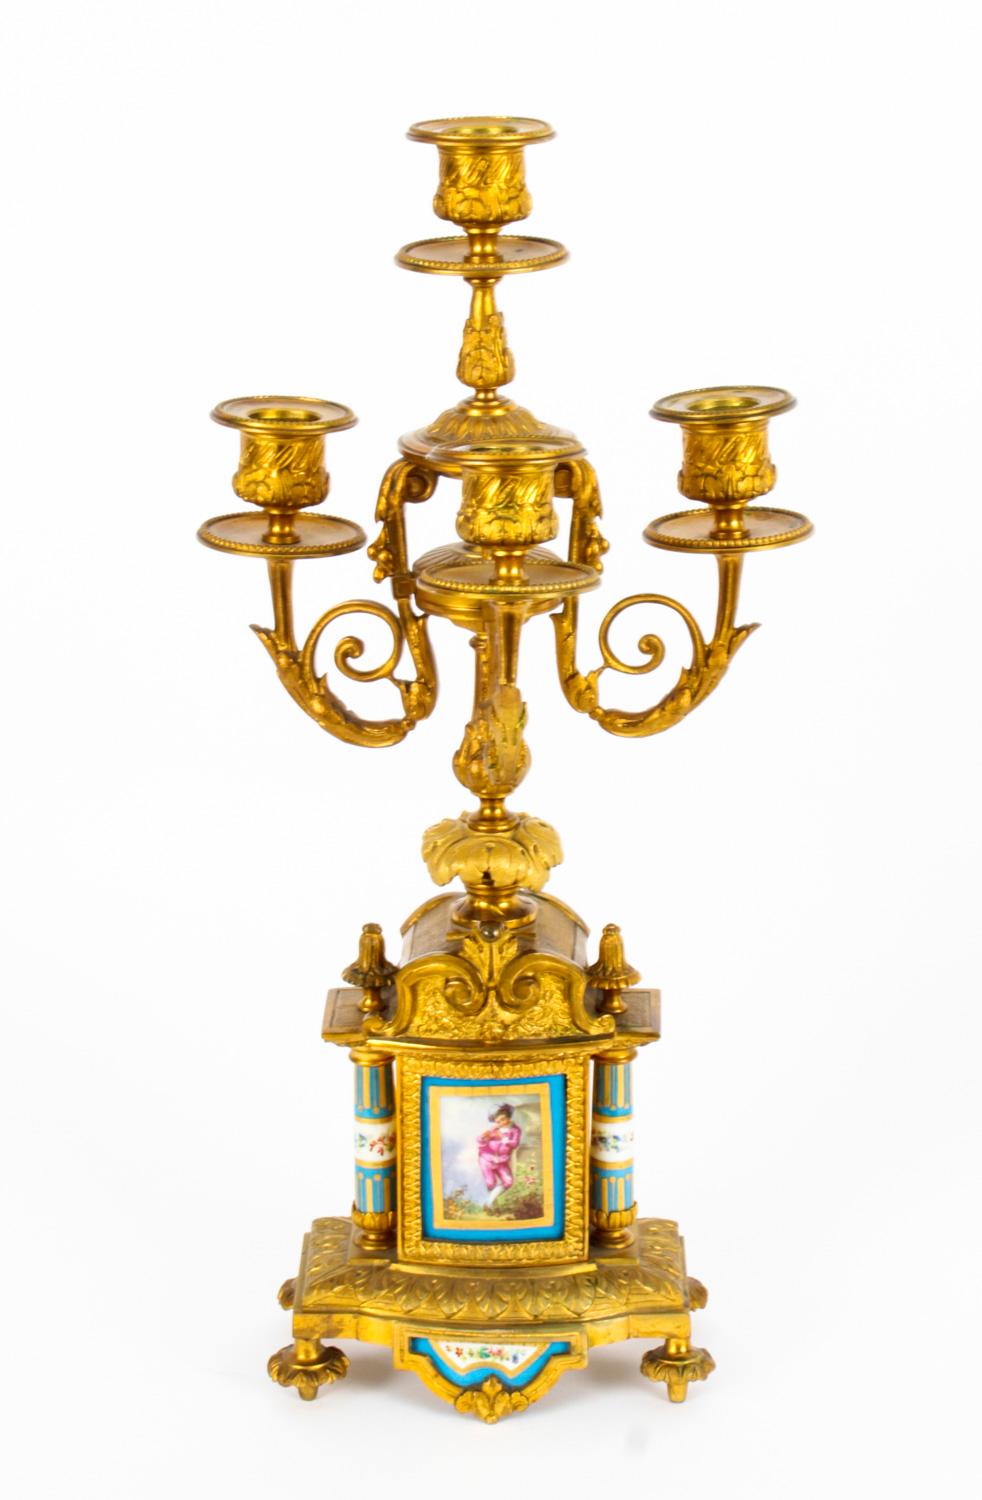 This is a delightful antique pair of Louis Revival ormolu and Sevres porcelain four-branch candelabra, circa 1860 in date.
 
They feature beaded nozzles and drip pans on S-scroll sconces and scrolling acanthus branches.

The inverted baluster